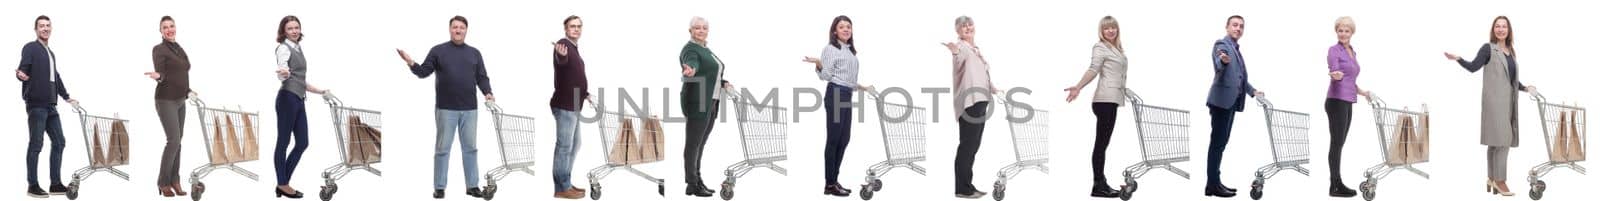 group of people with shopping cart on white by asdf